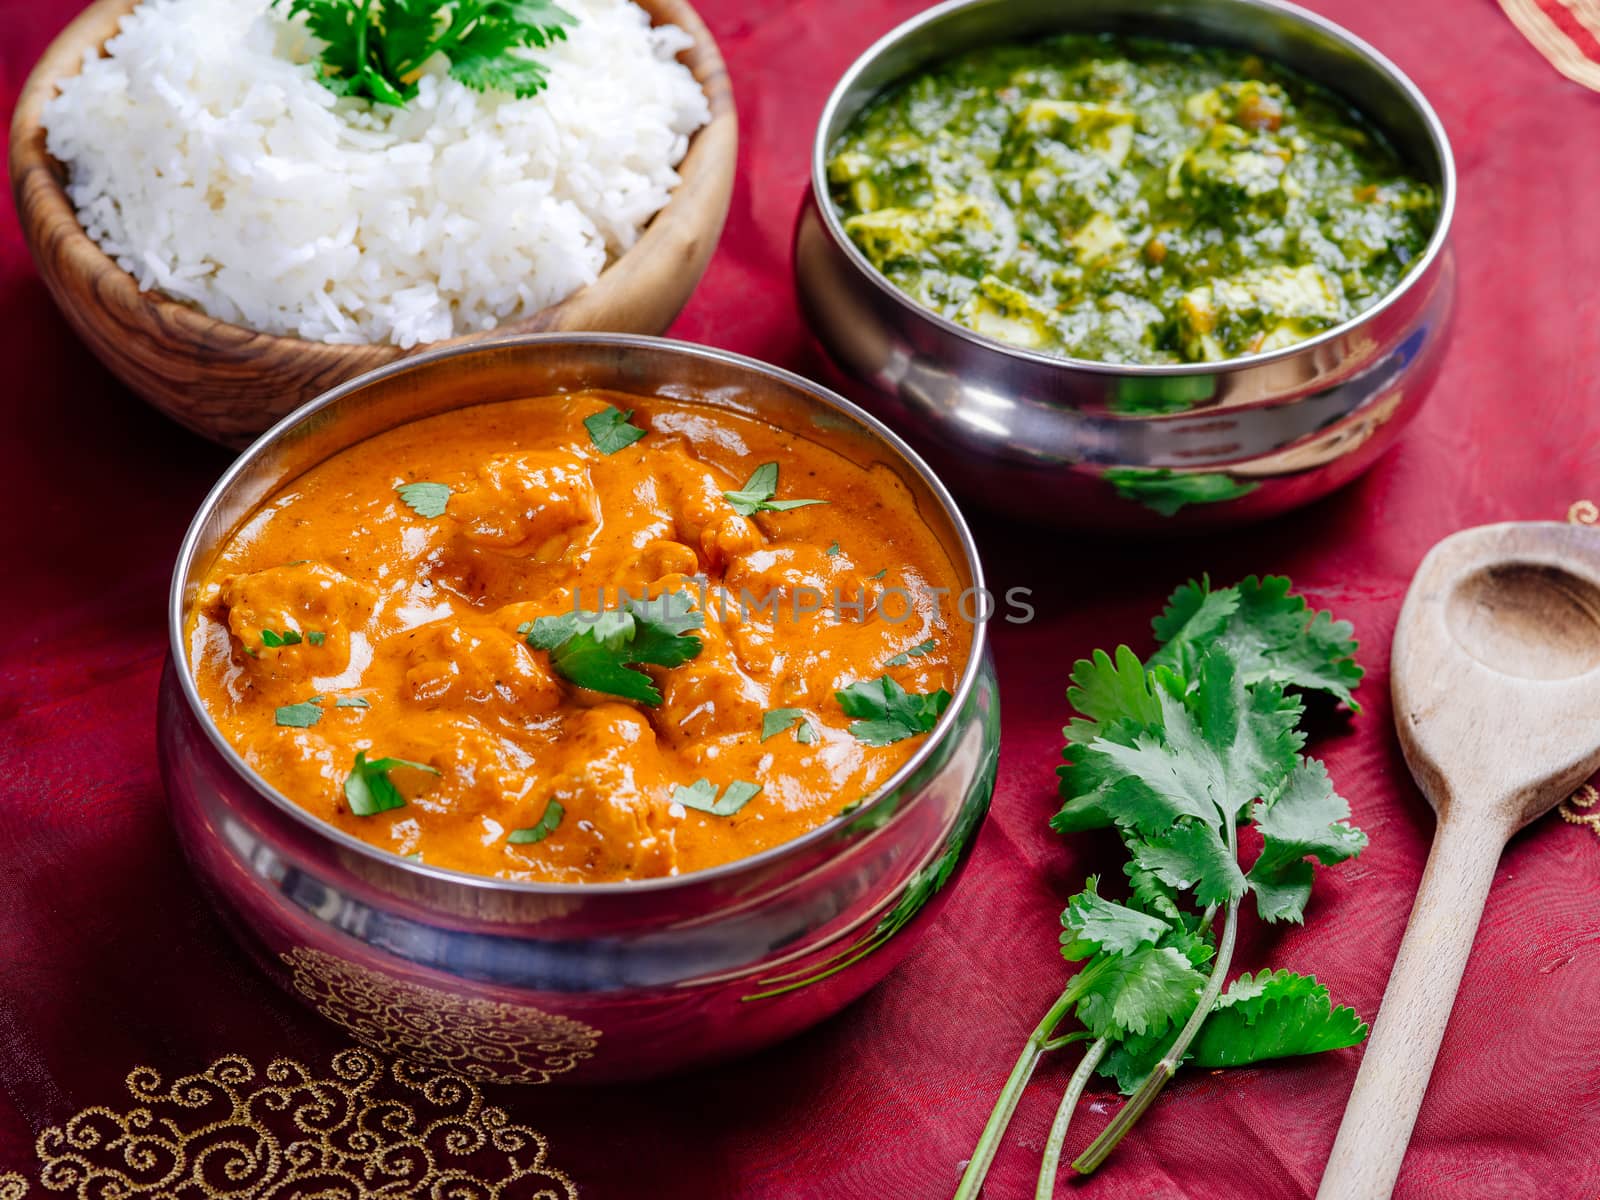 Butter chicken and Saag Paneer by sumners